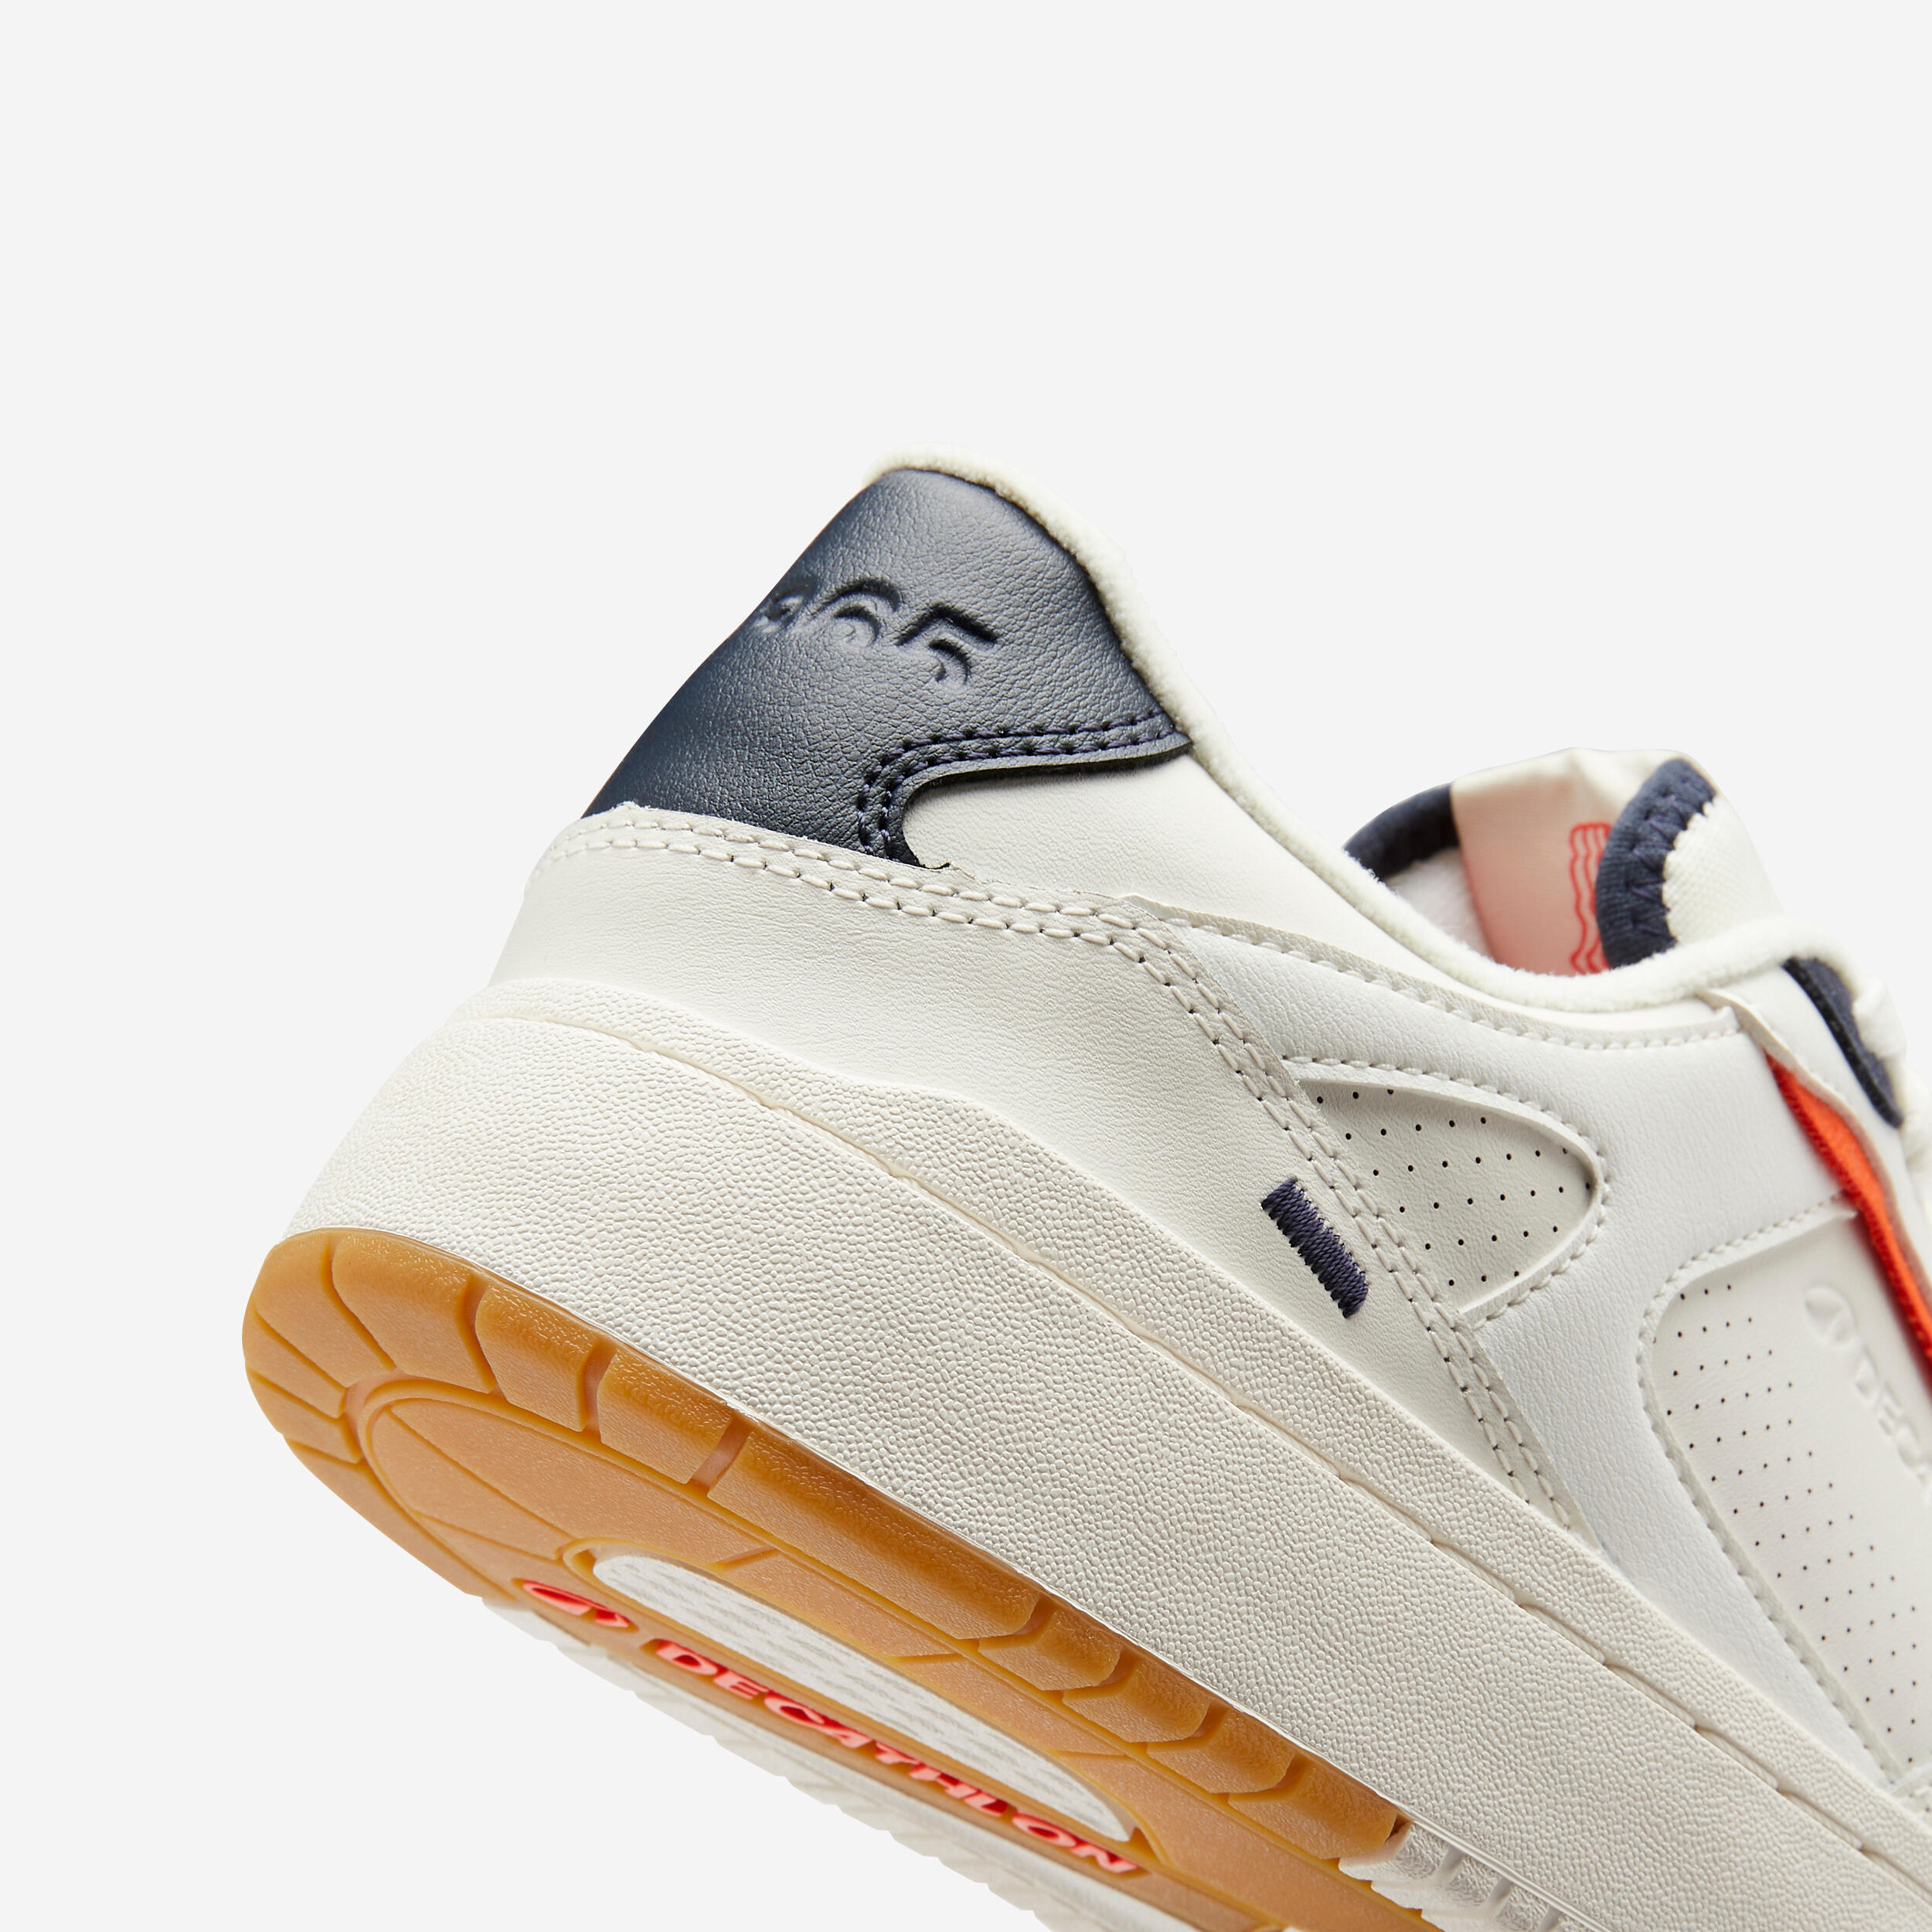 CJ80 Trainers - Cream and navy blue 4/7